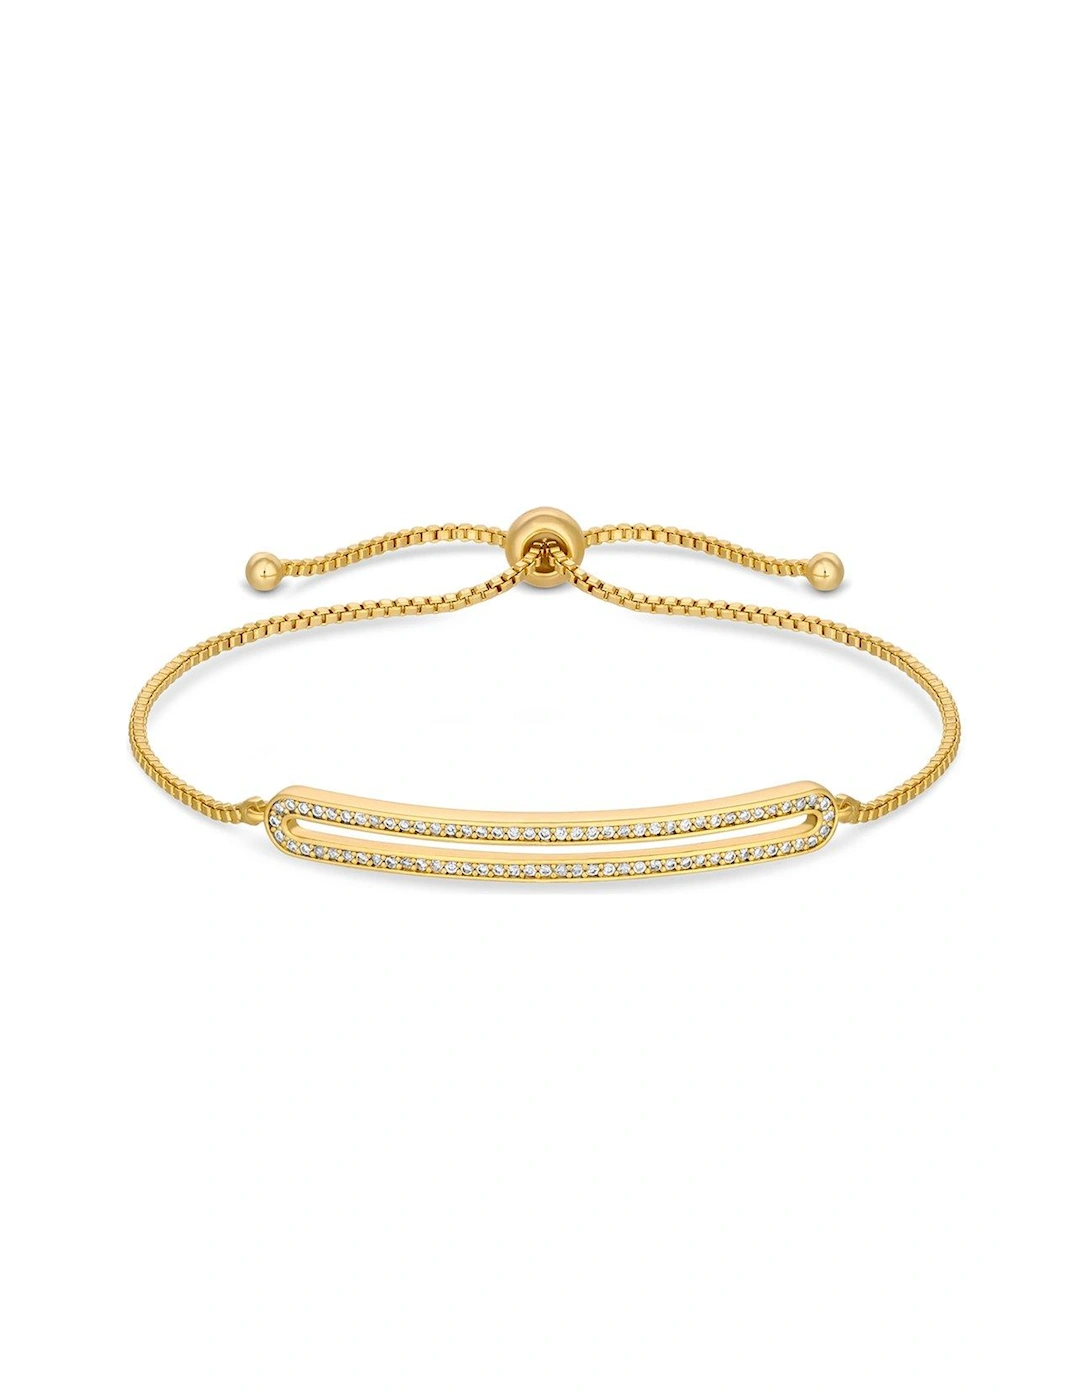 GOLD PLATE CUBIC ZIRCONIA OPEN BAR TOGGLE BRACELET, 2 of 1